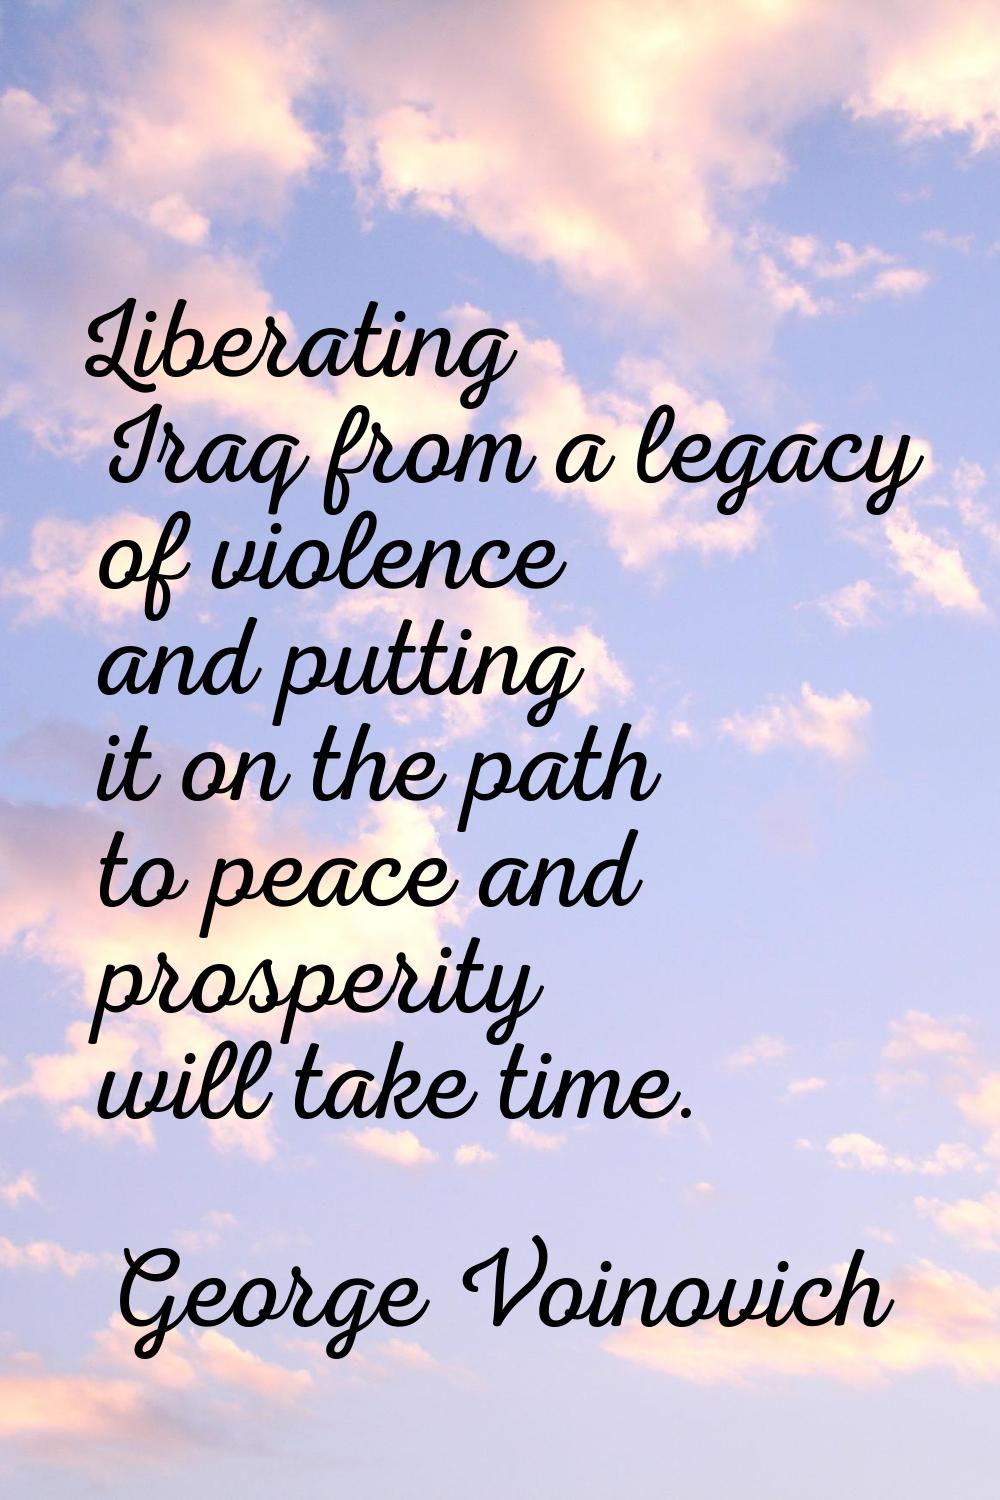 Liberating Iraq from a legacy of violence and putting it on the path to peace and prosperity will t